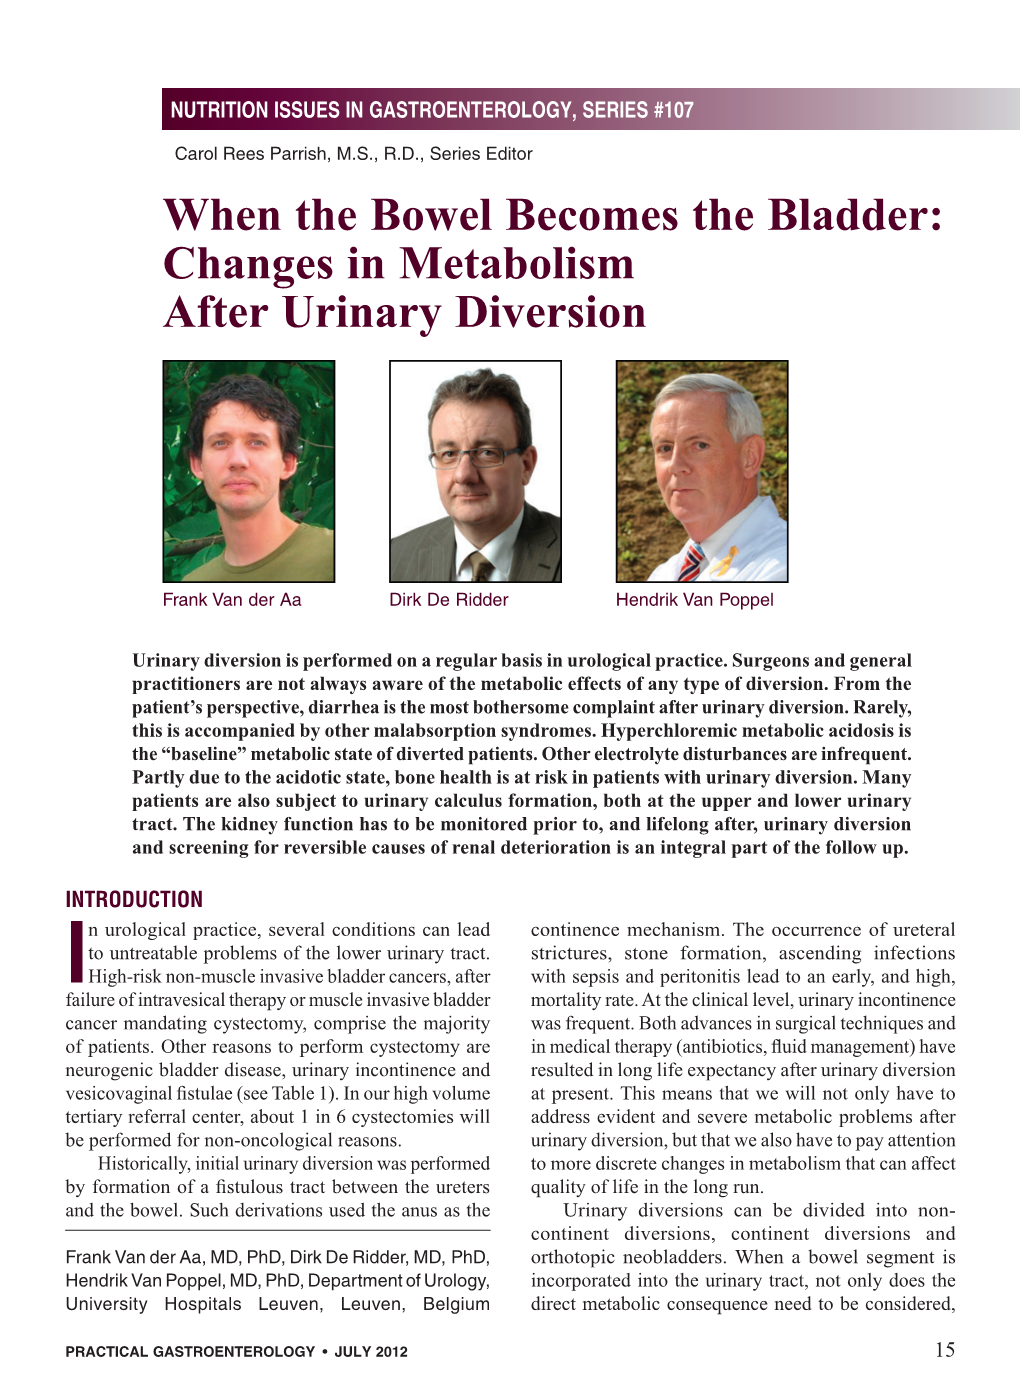 When the Bowel Becomes the Bladder: Metabolism After Urinary Diversion